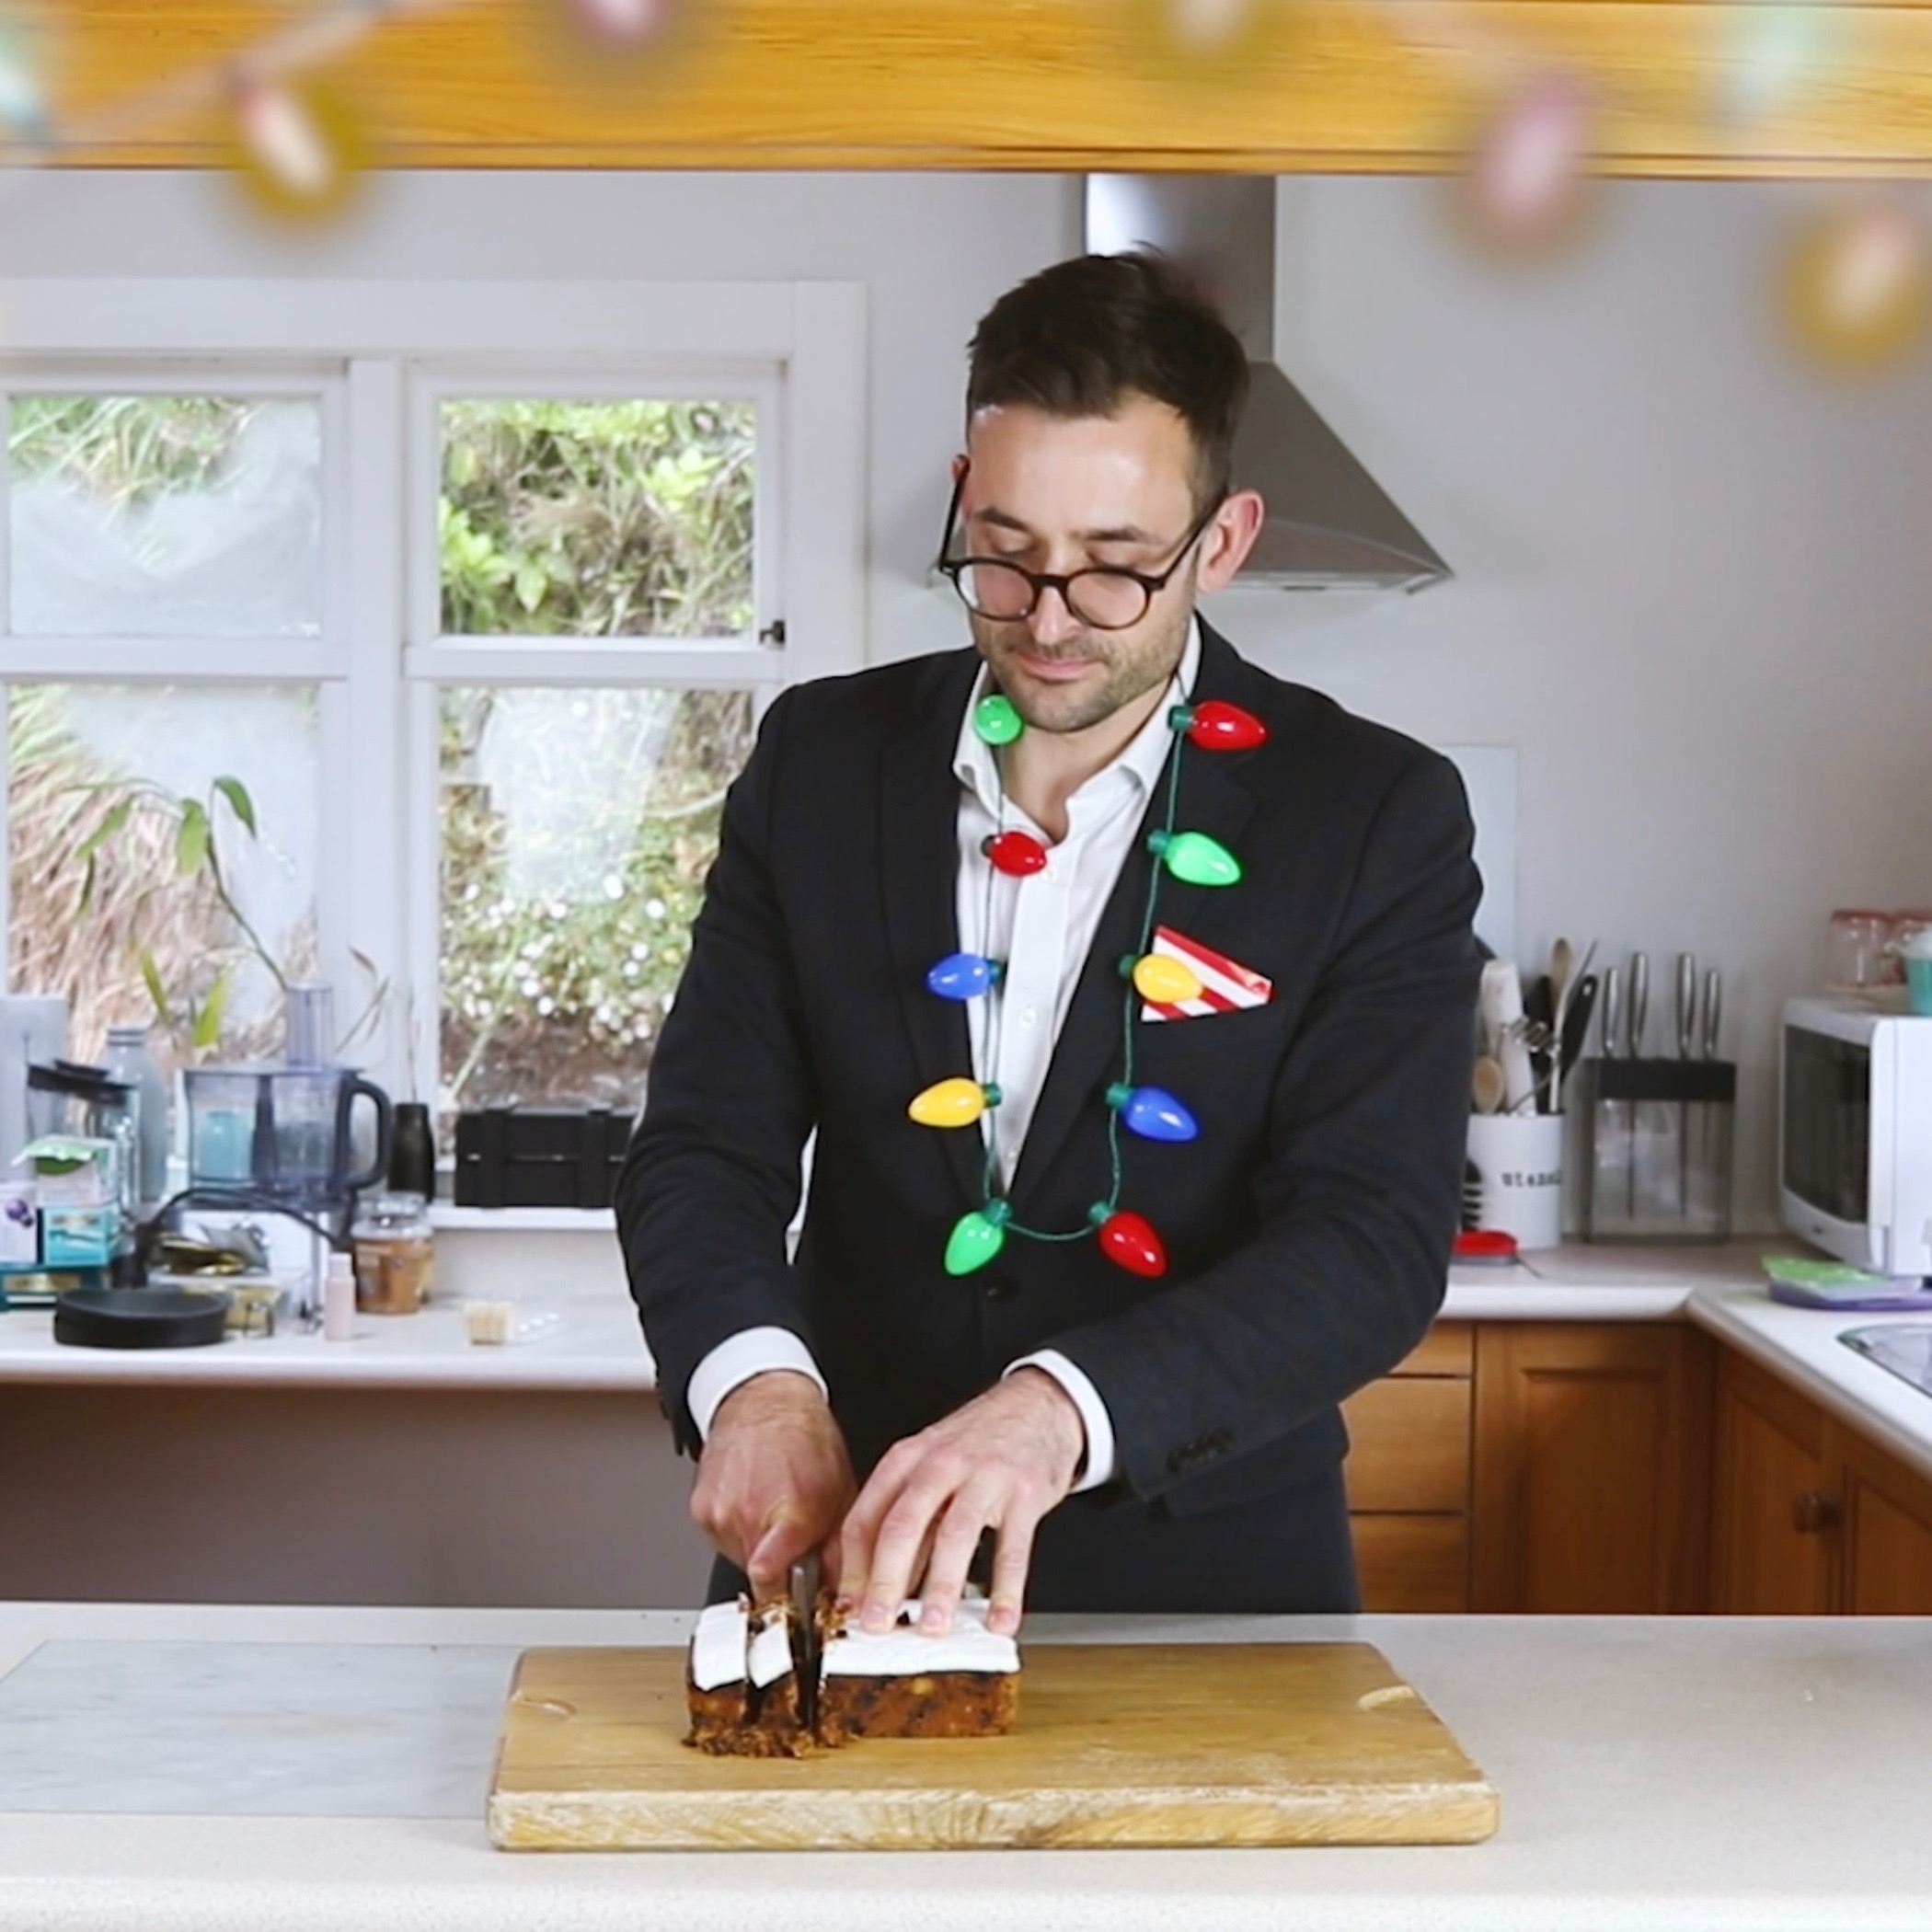 Be careful when cutting your Christmas cake.